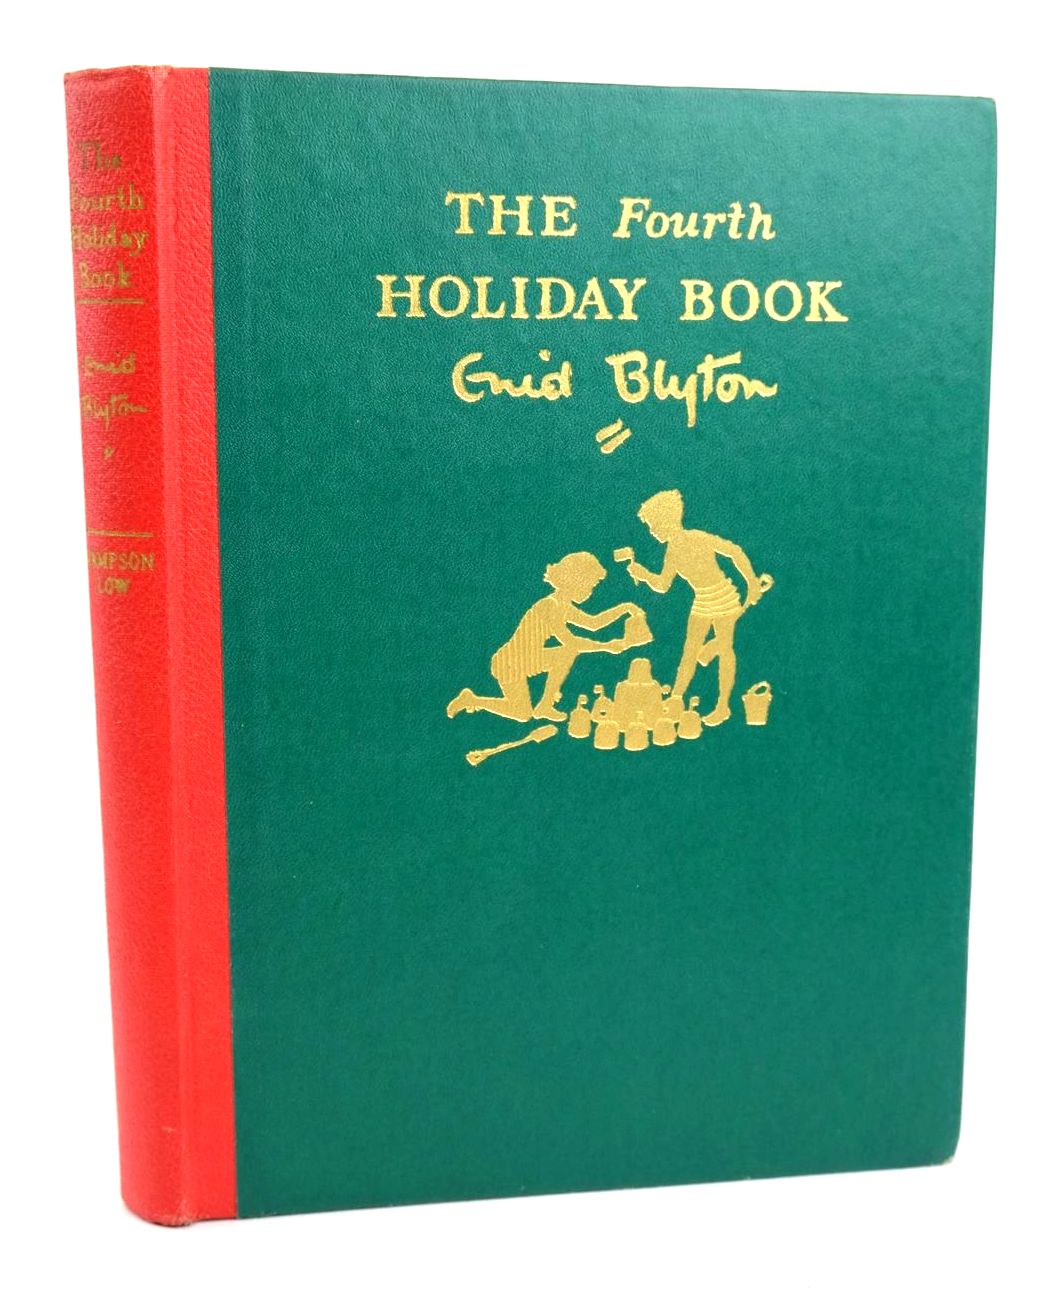 Photo of THE FOURTH HOLIDAY BOOK written by Blyton, Enid illustrated by Boswell, Hilda
et al.,  published by Sampson Low, Marston & Co. Ltd. (STOCK CODE: 1319031)  for sale by Stella & Rose's Books